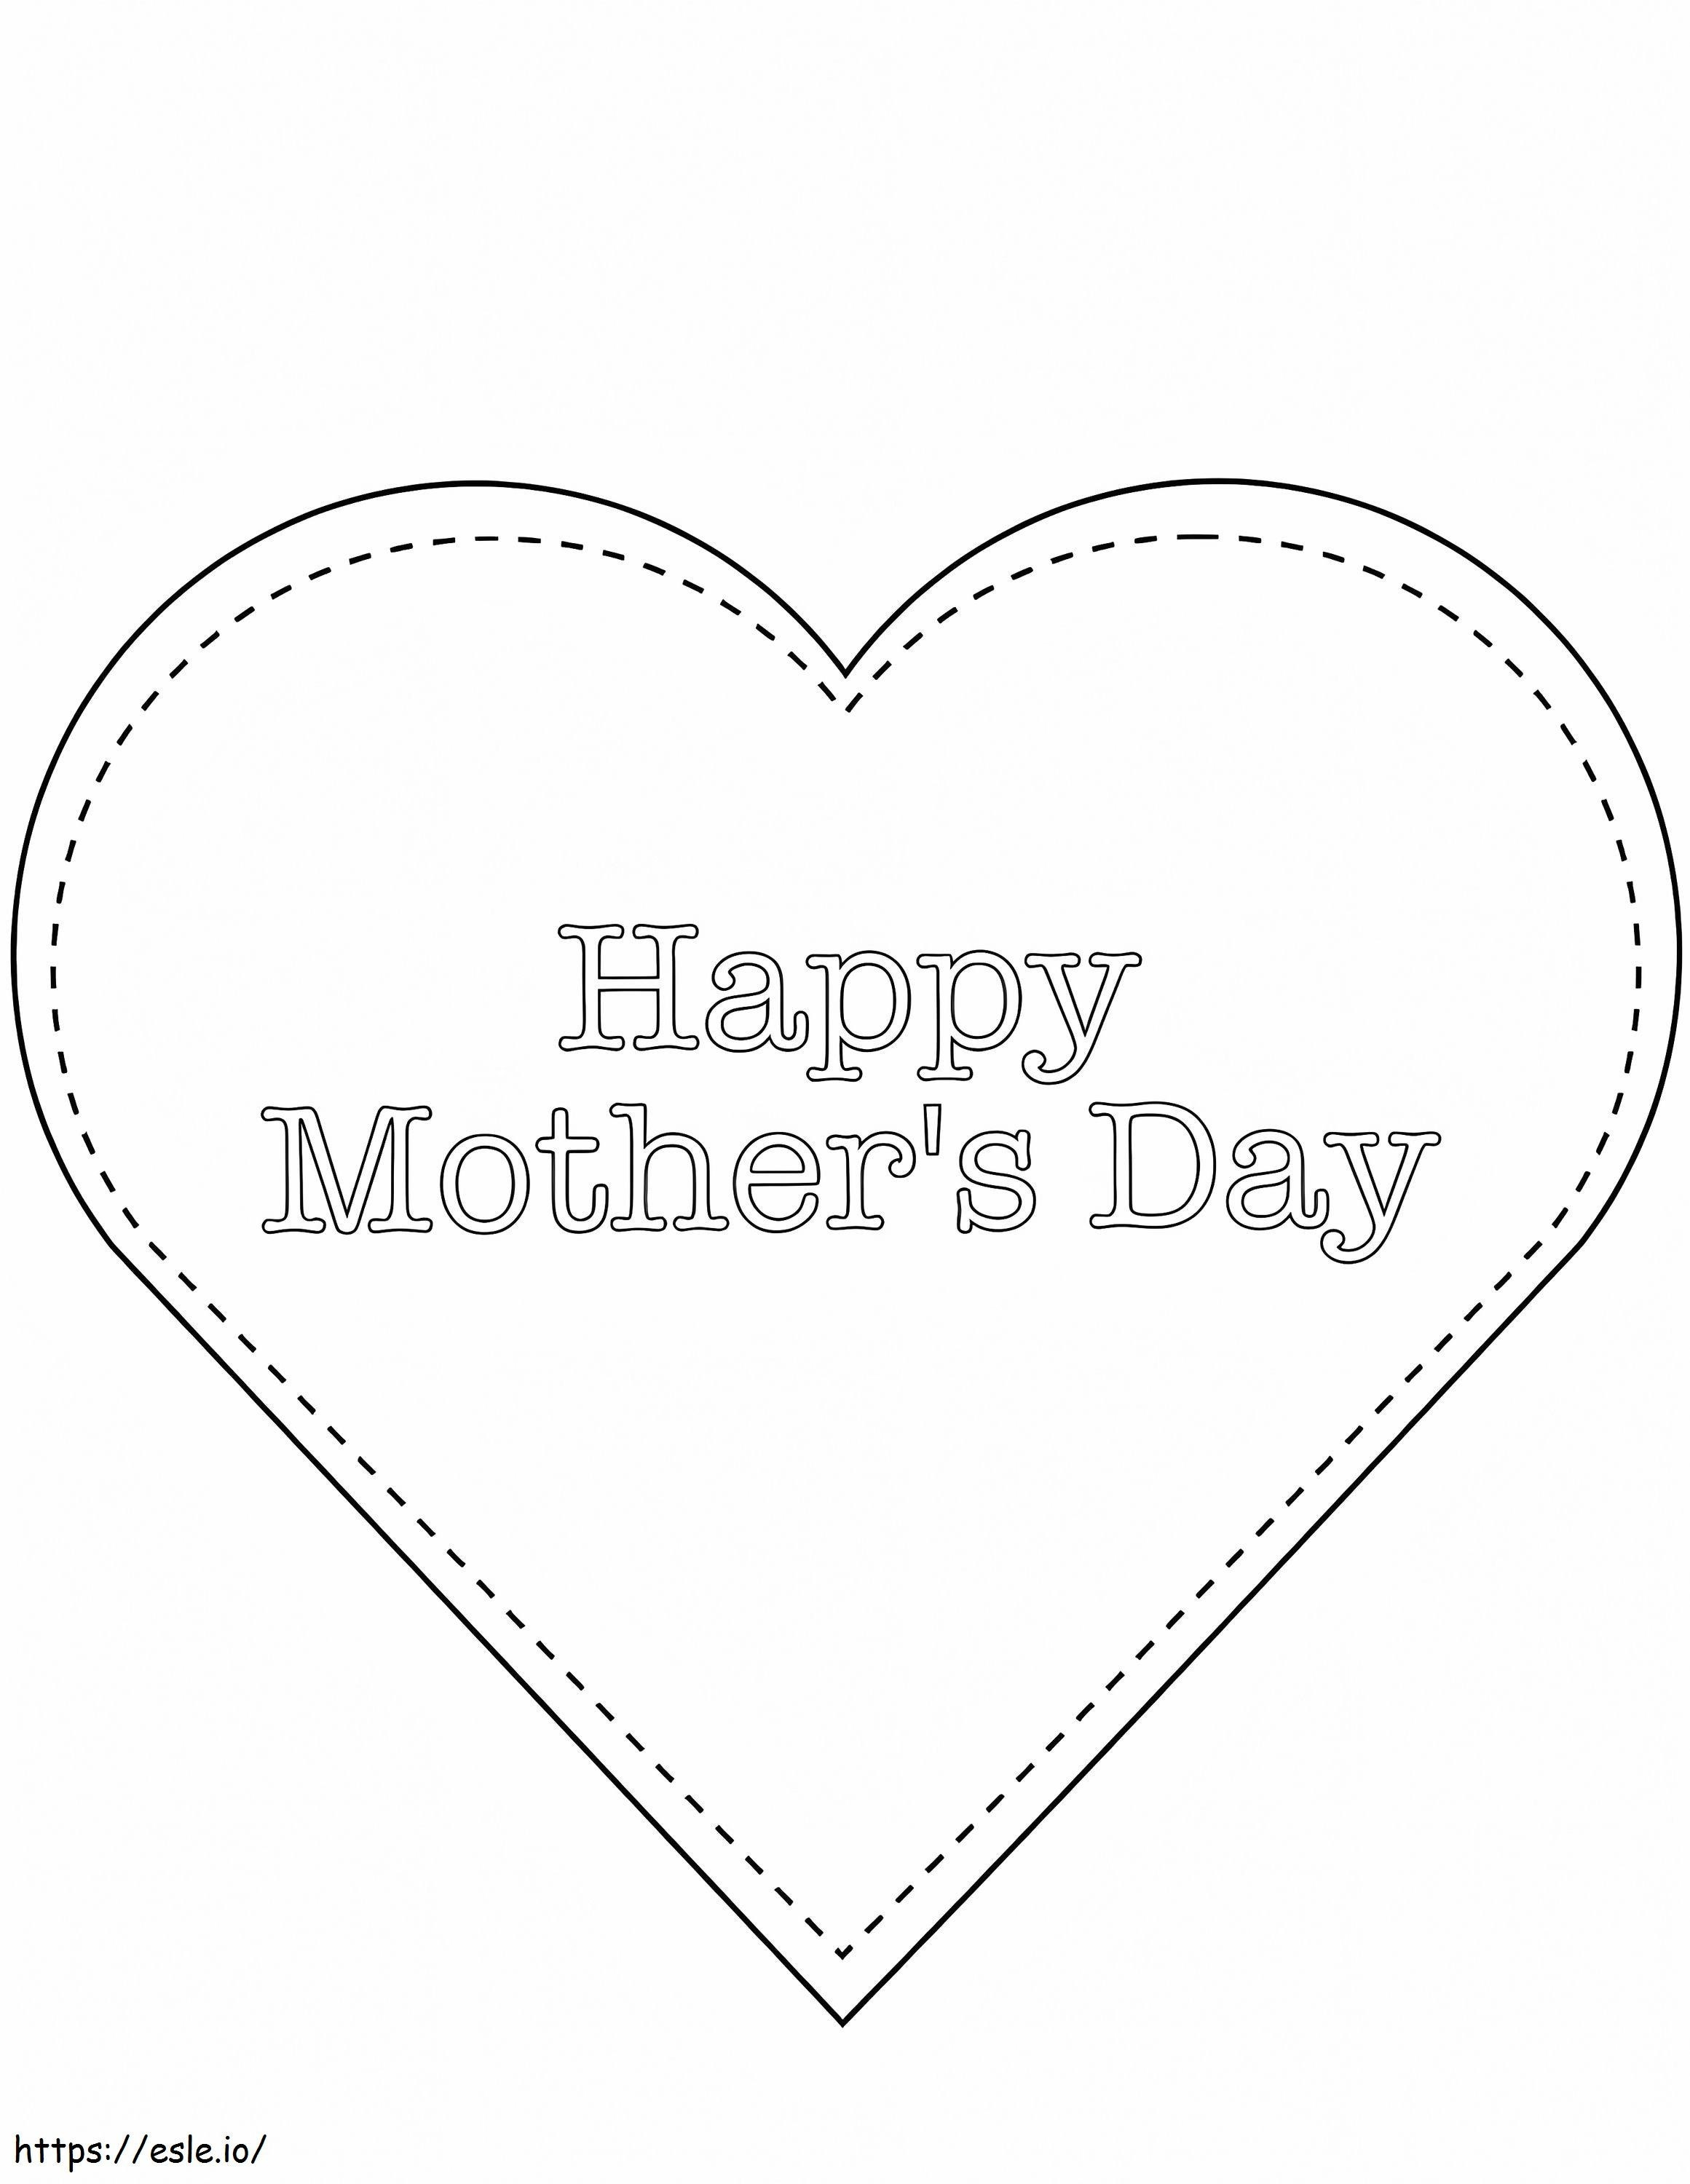 1579576077 Happy Mothers Day Heart coloring page